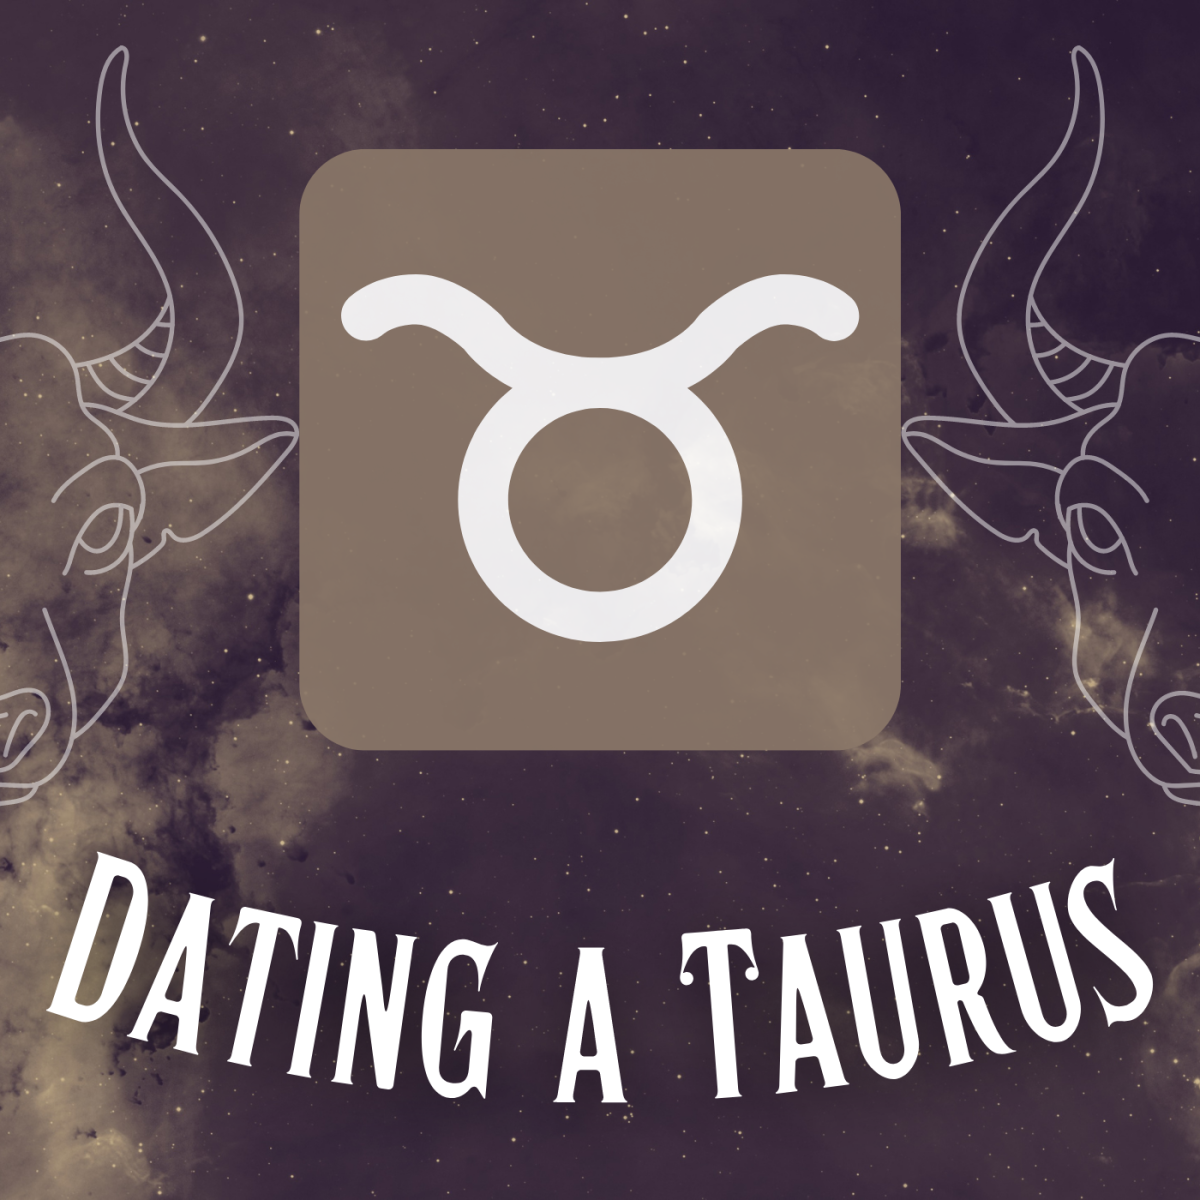 What is it like to date the bull of the zodiac? Explore the Taurus personality and relationship style here!